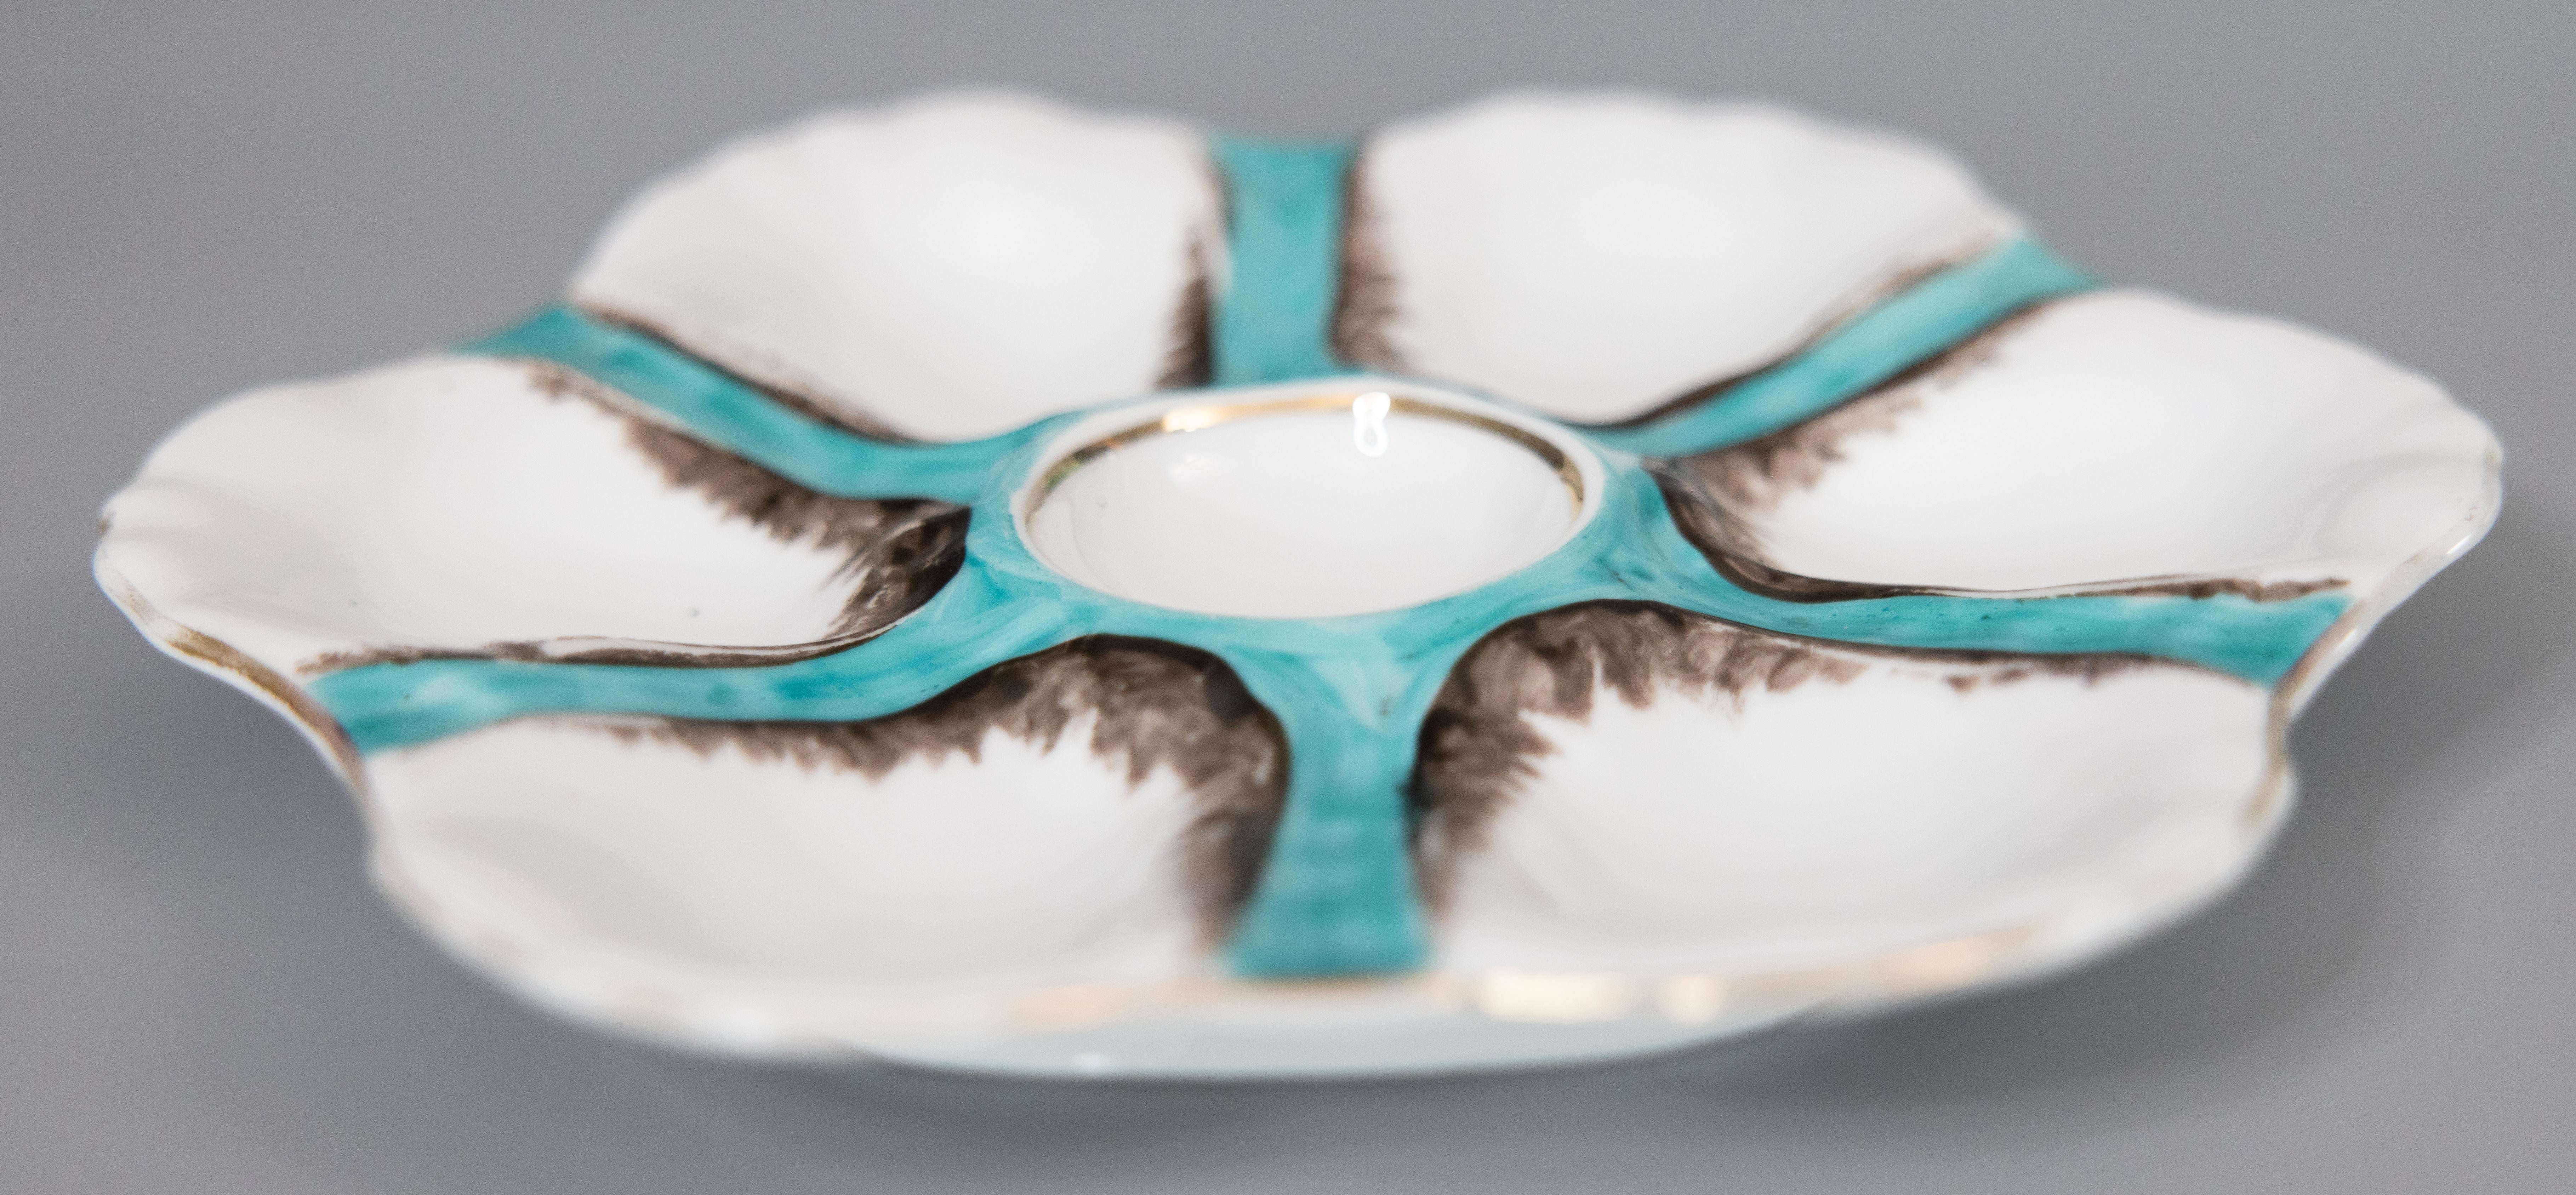 A gorgeous antique French porcelain oyster plate attributed to Limoges, circa 1900. This fine quality oyster plate has six wells and is hand painted in a beautiful blue green teal / turquoise color with gilt details. It displays beautifully and